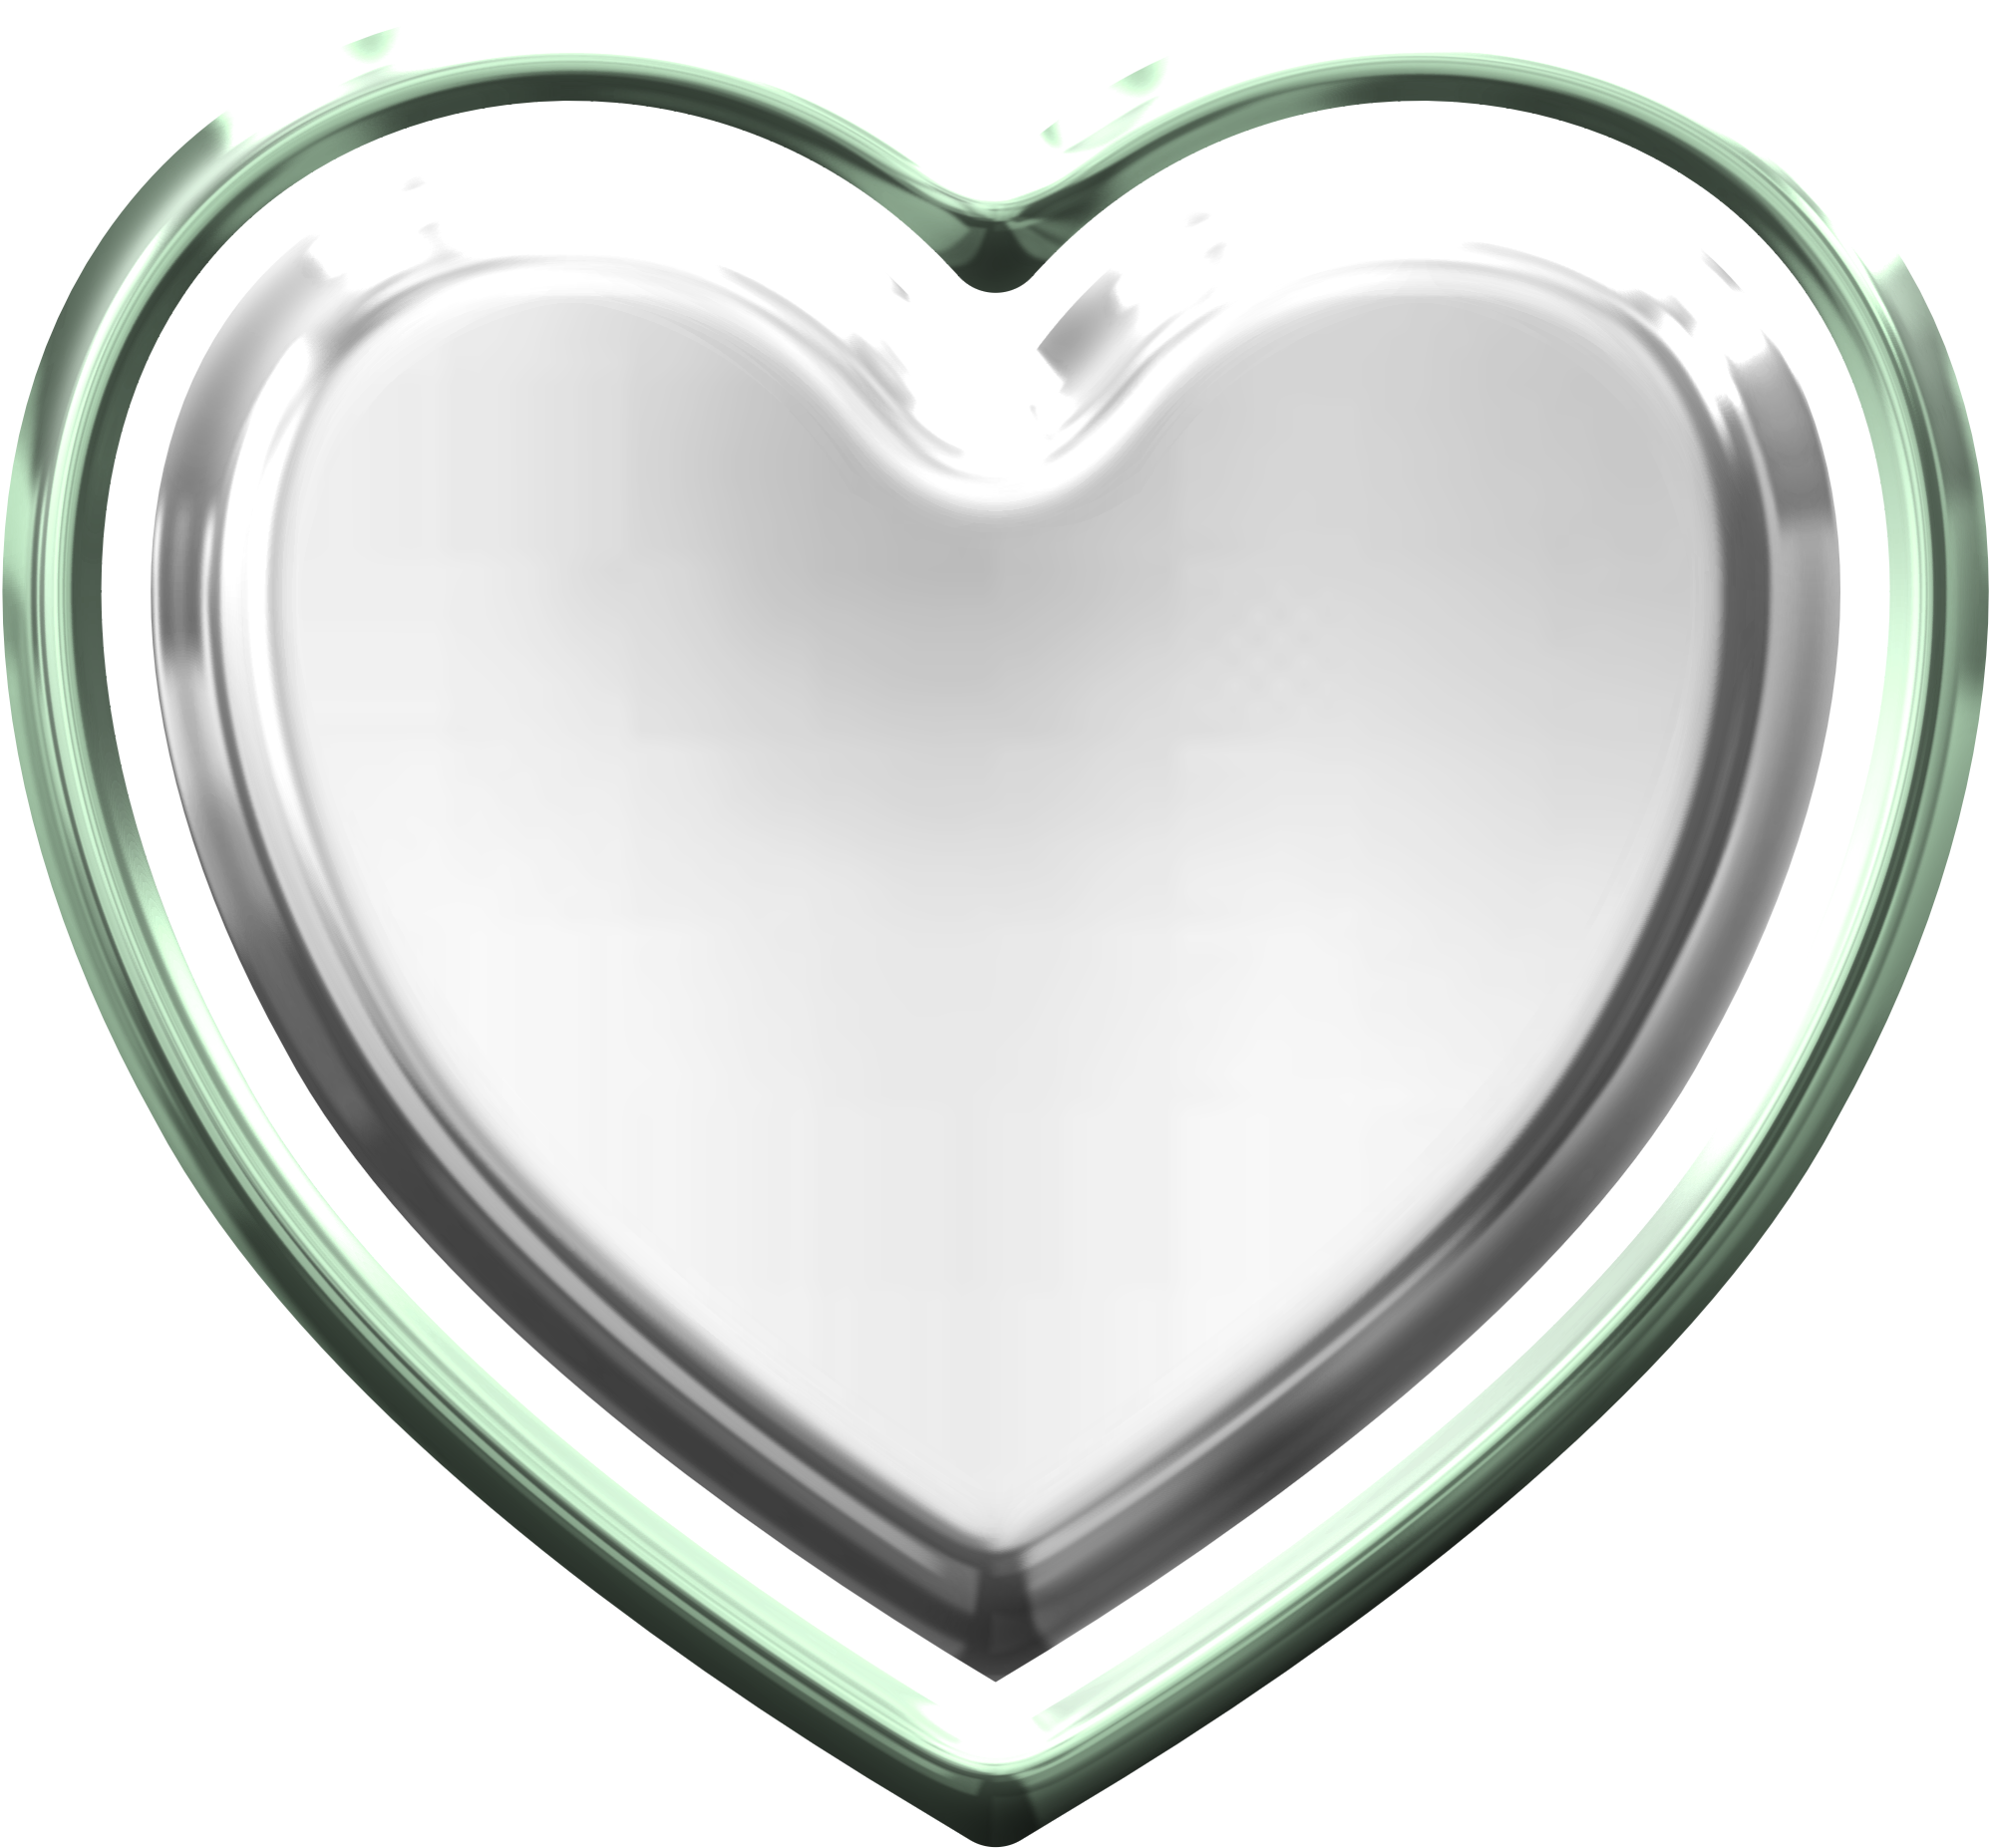 A Silver Heart With Green Border